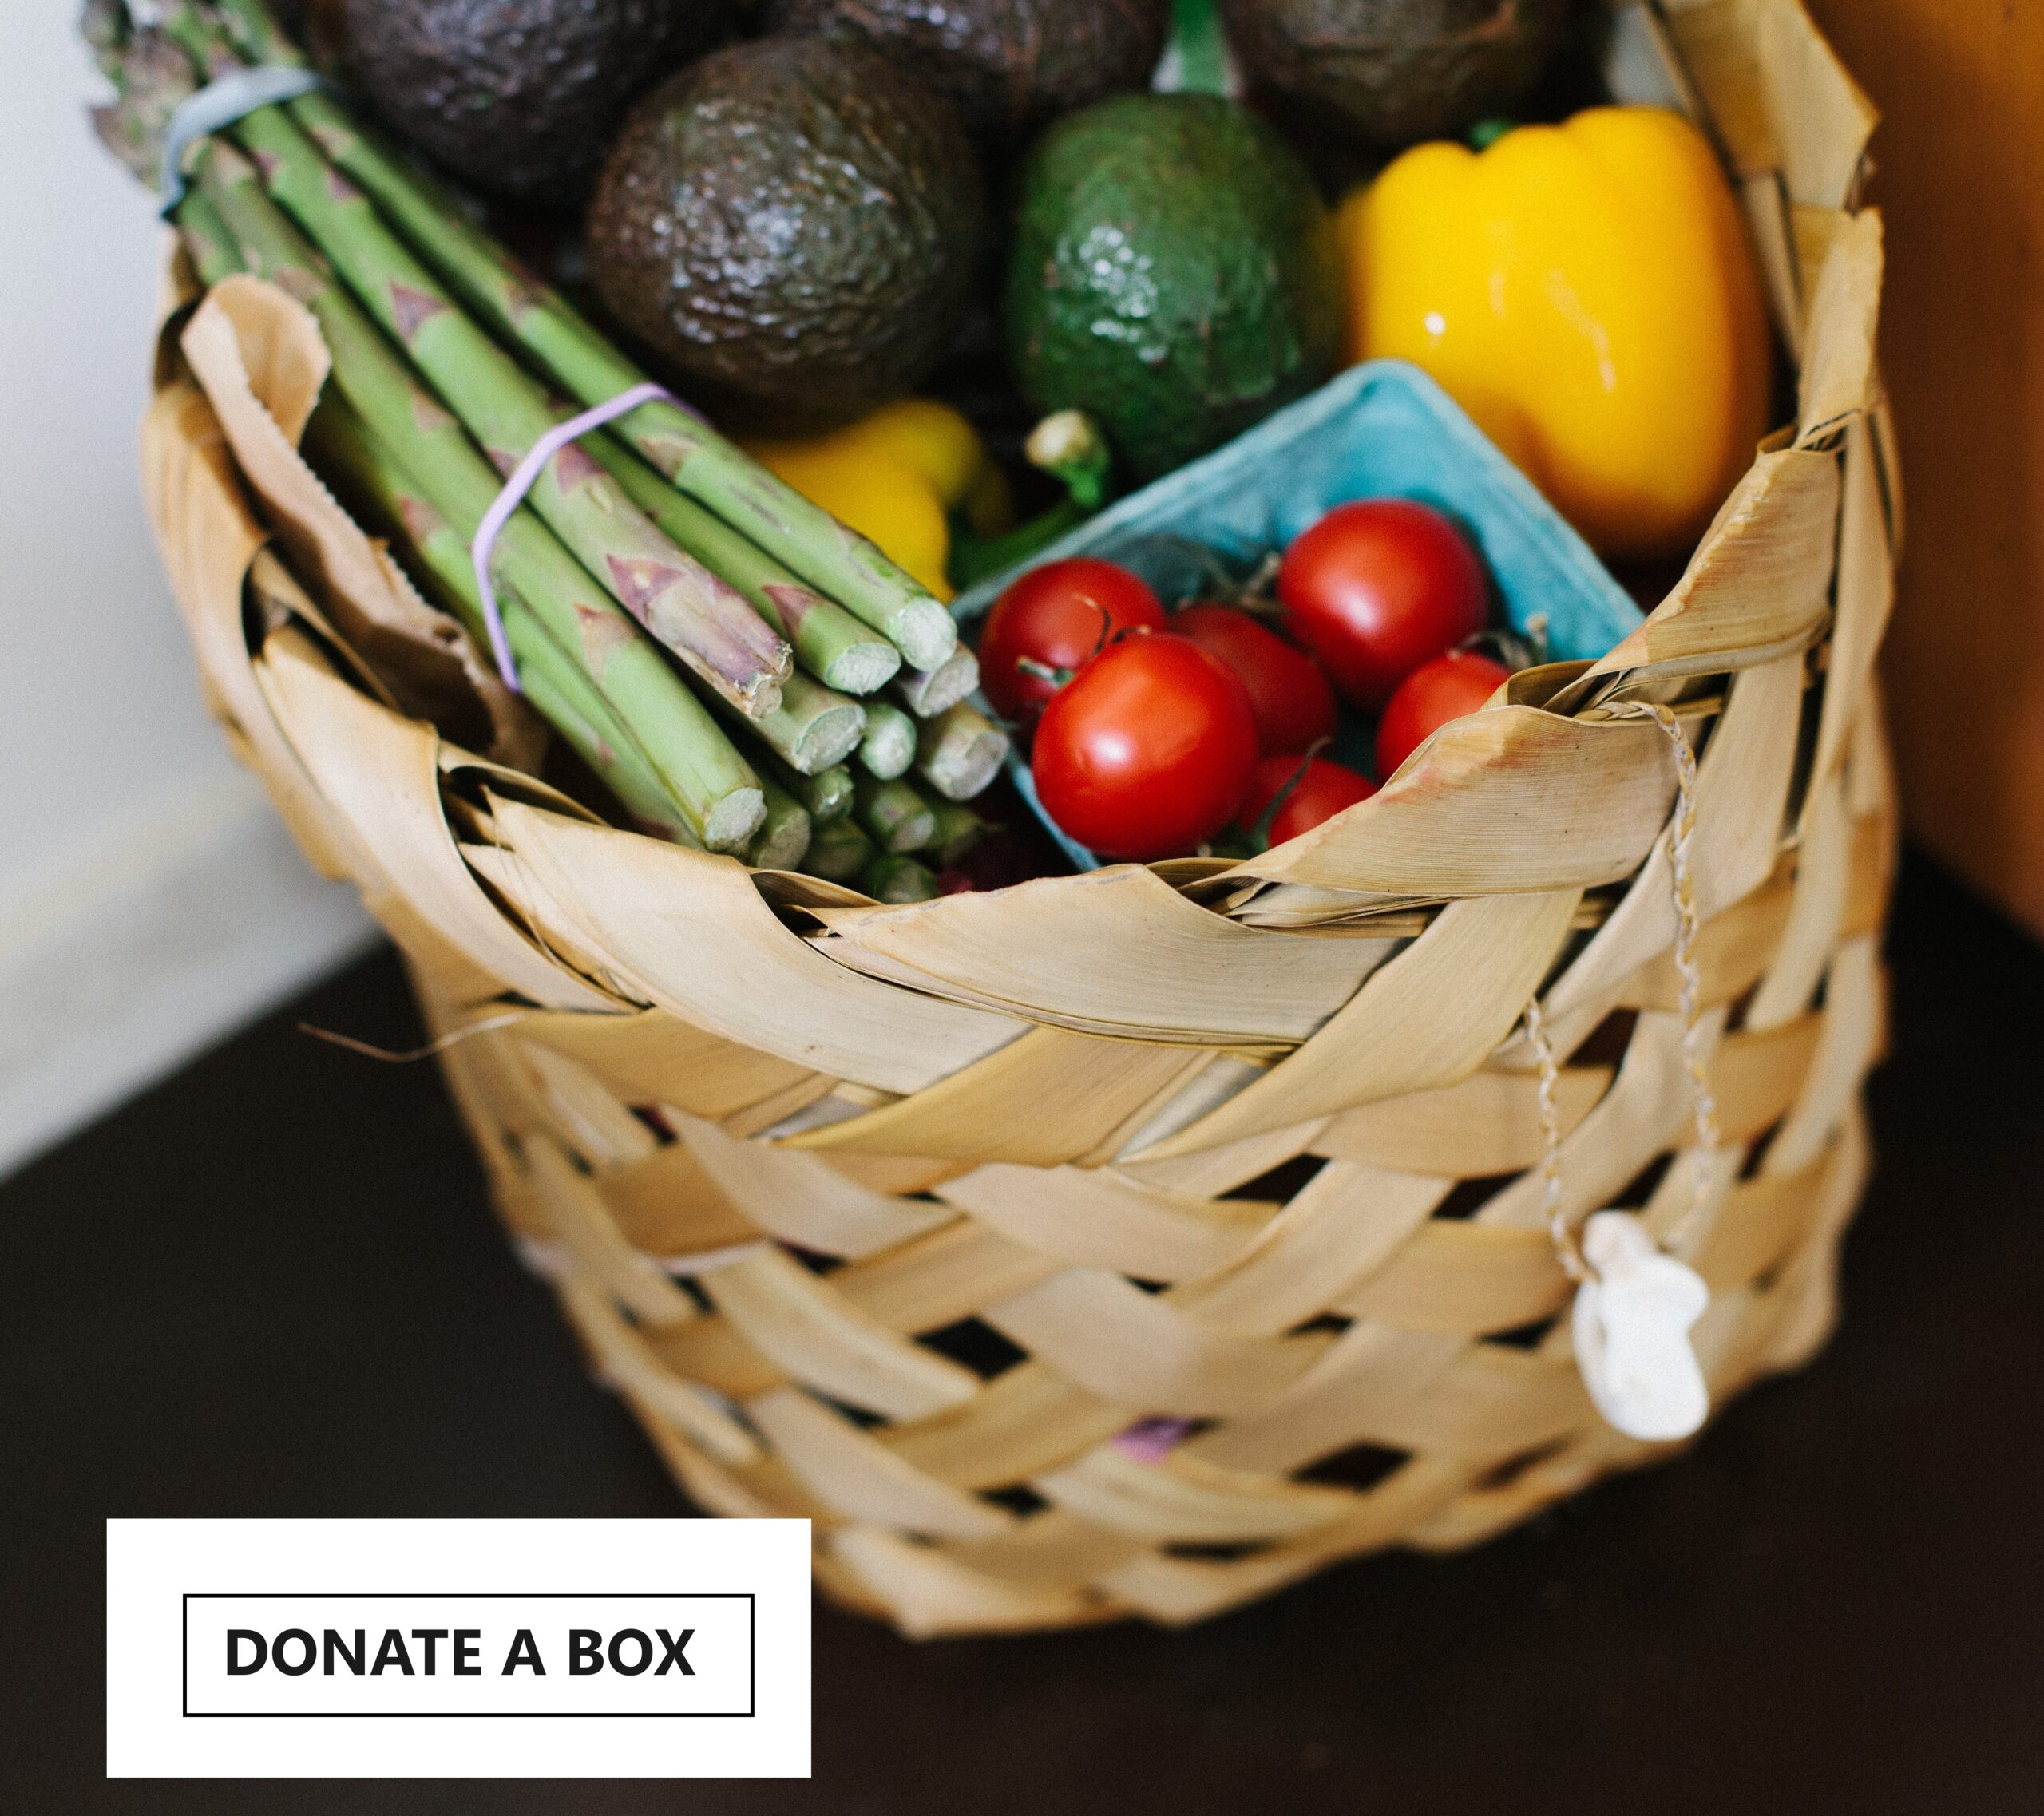 Click Image to Donate a Box to a Family in Need